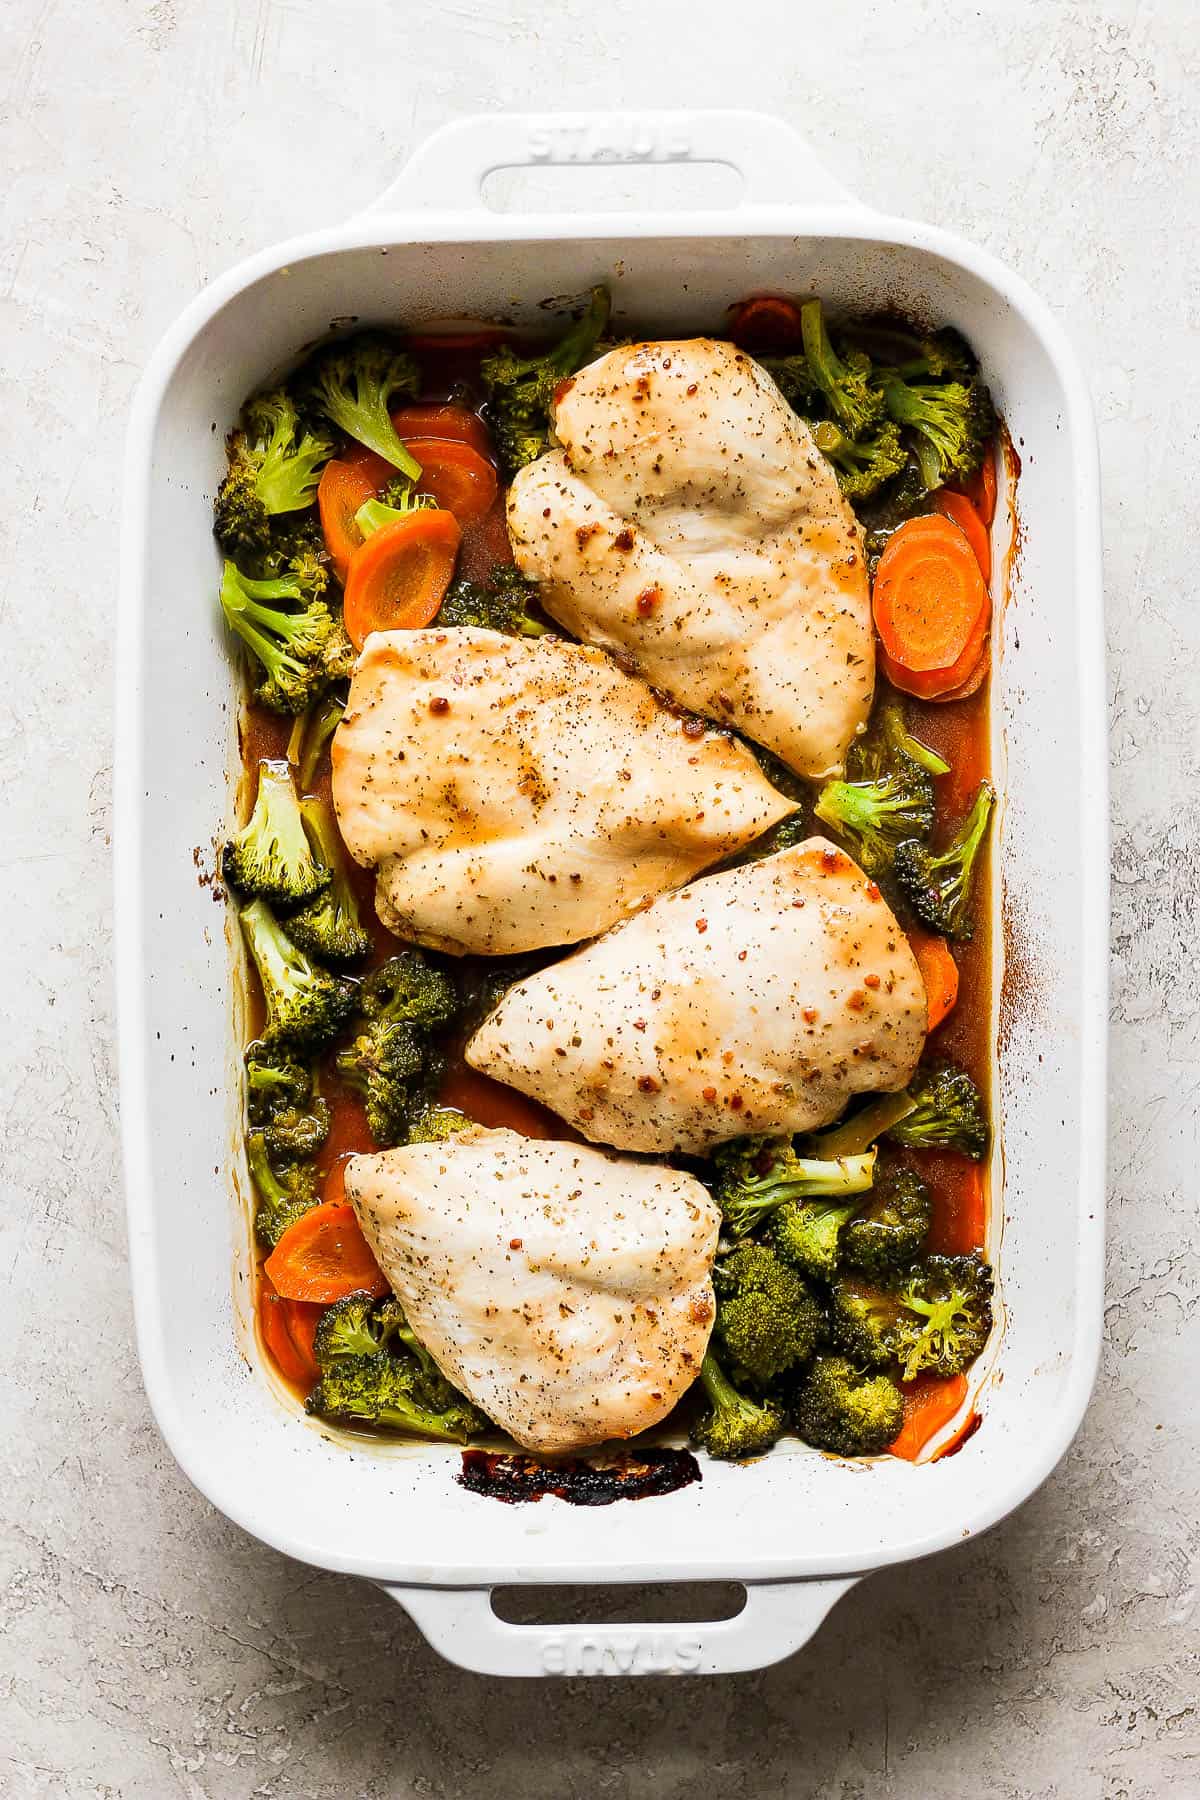 Cooked chicken and veggies in the baking sheet.